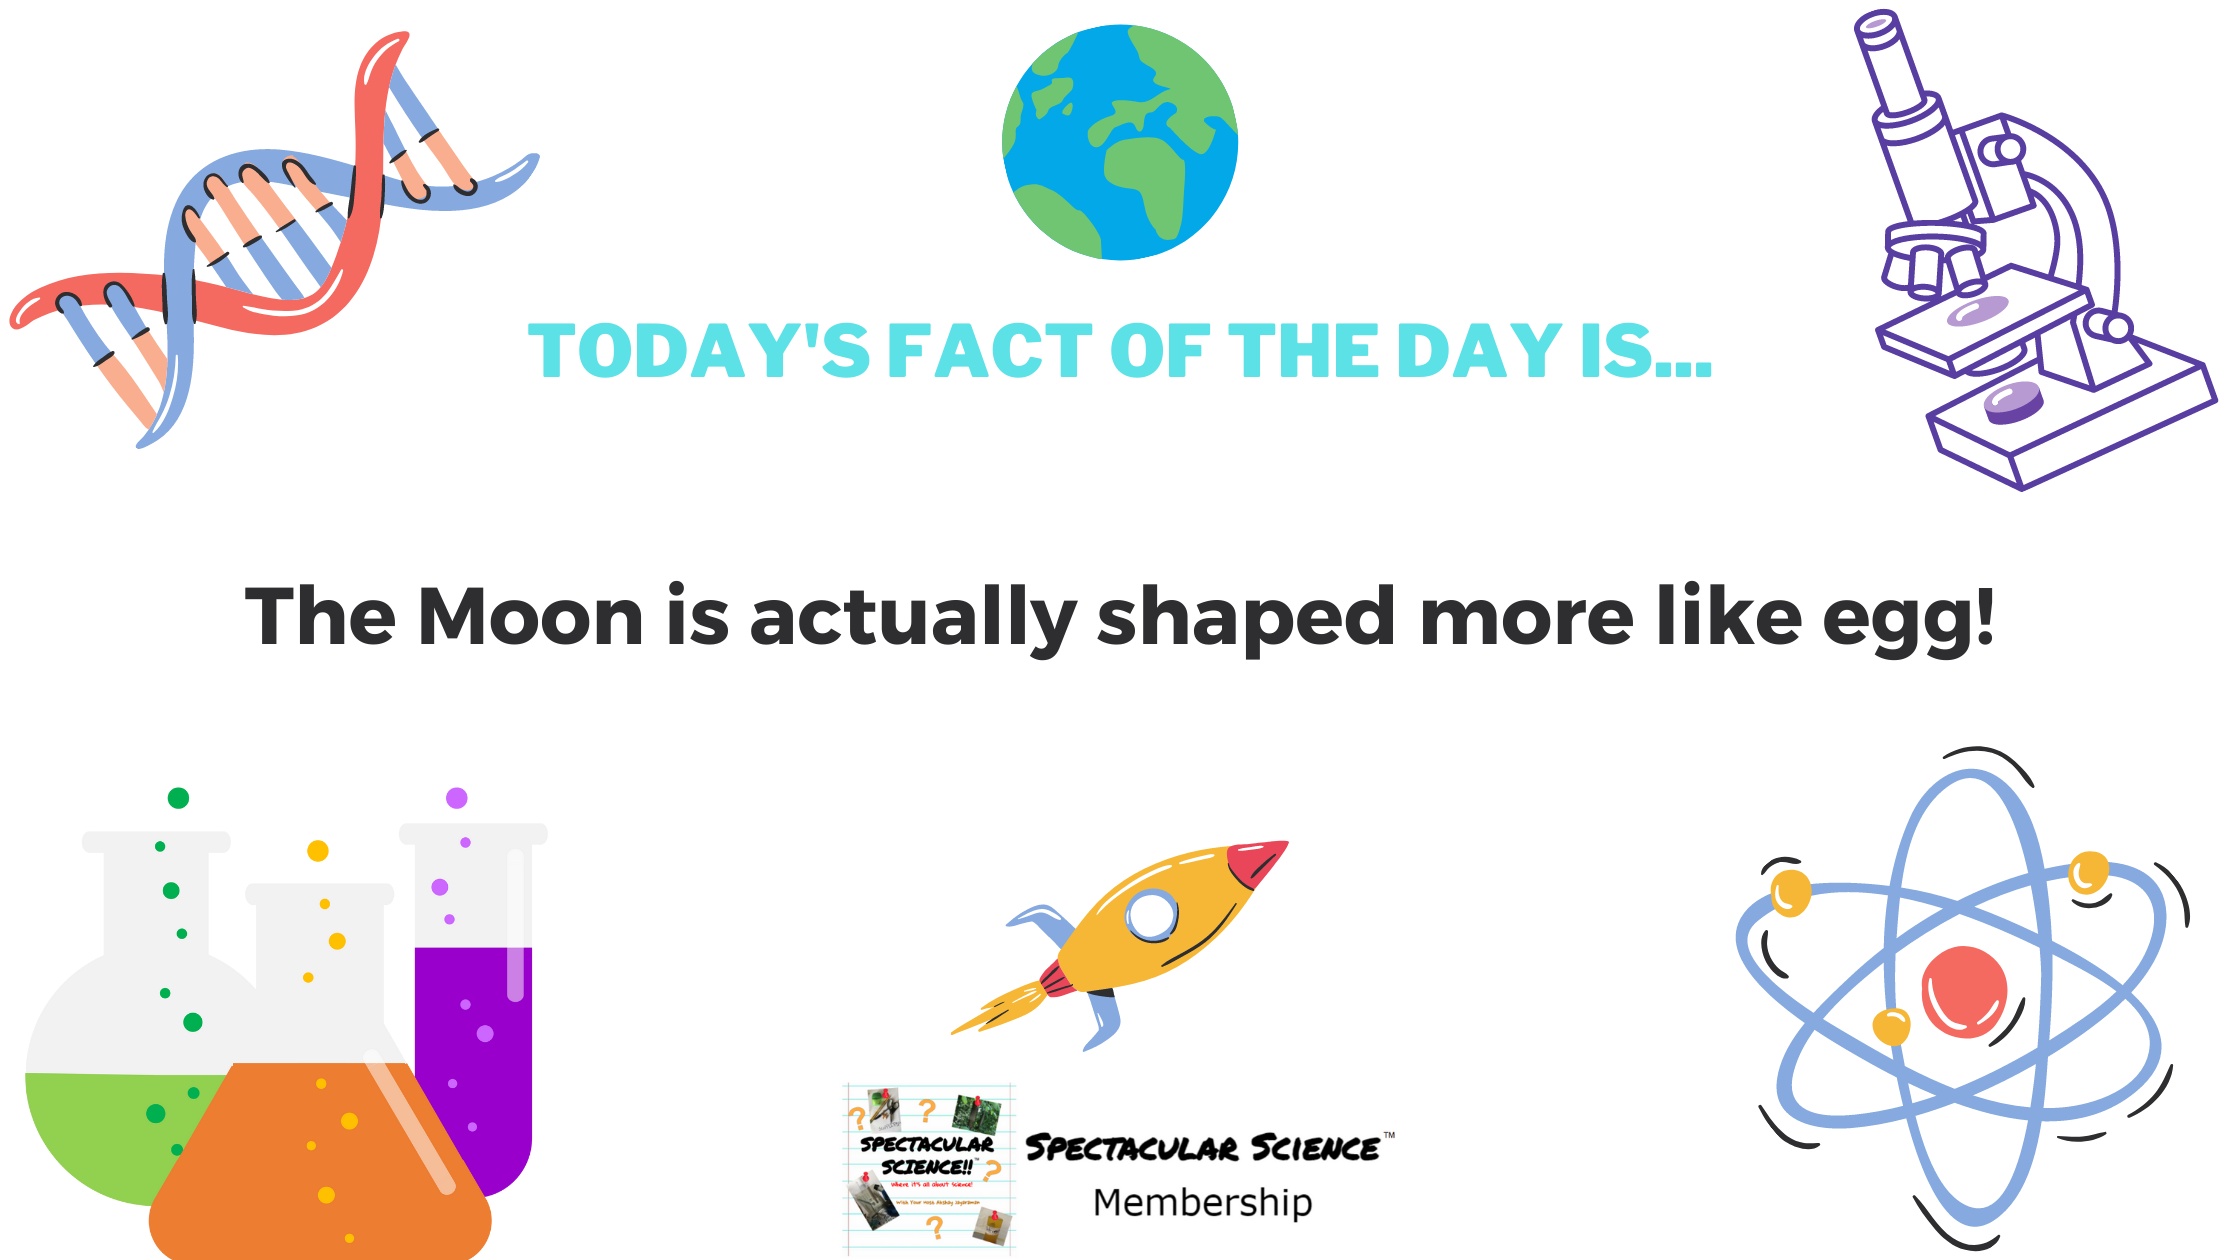 Fact of the Day Image Apr. 26th